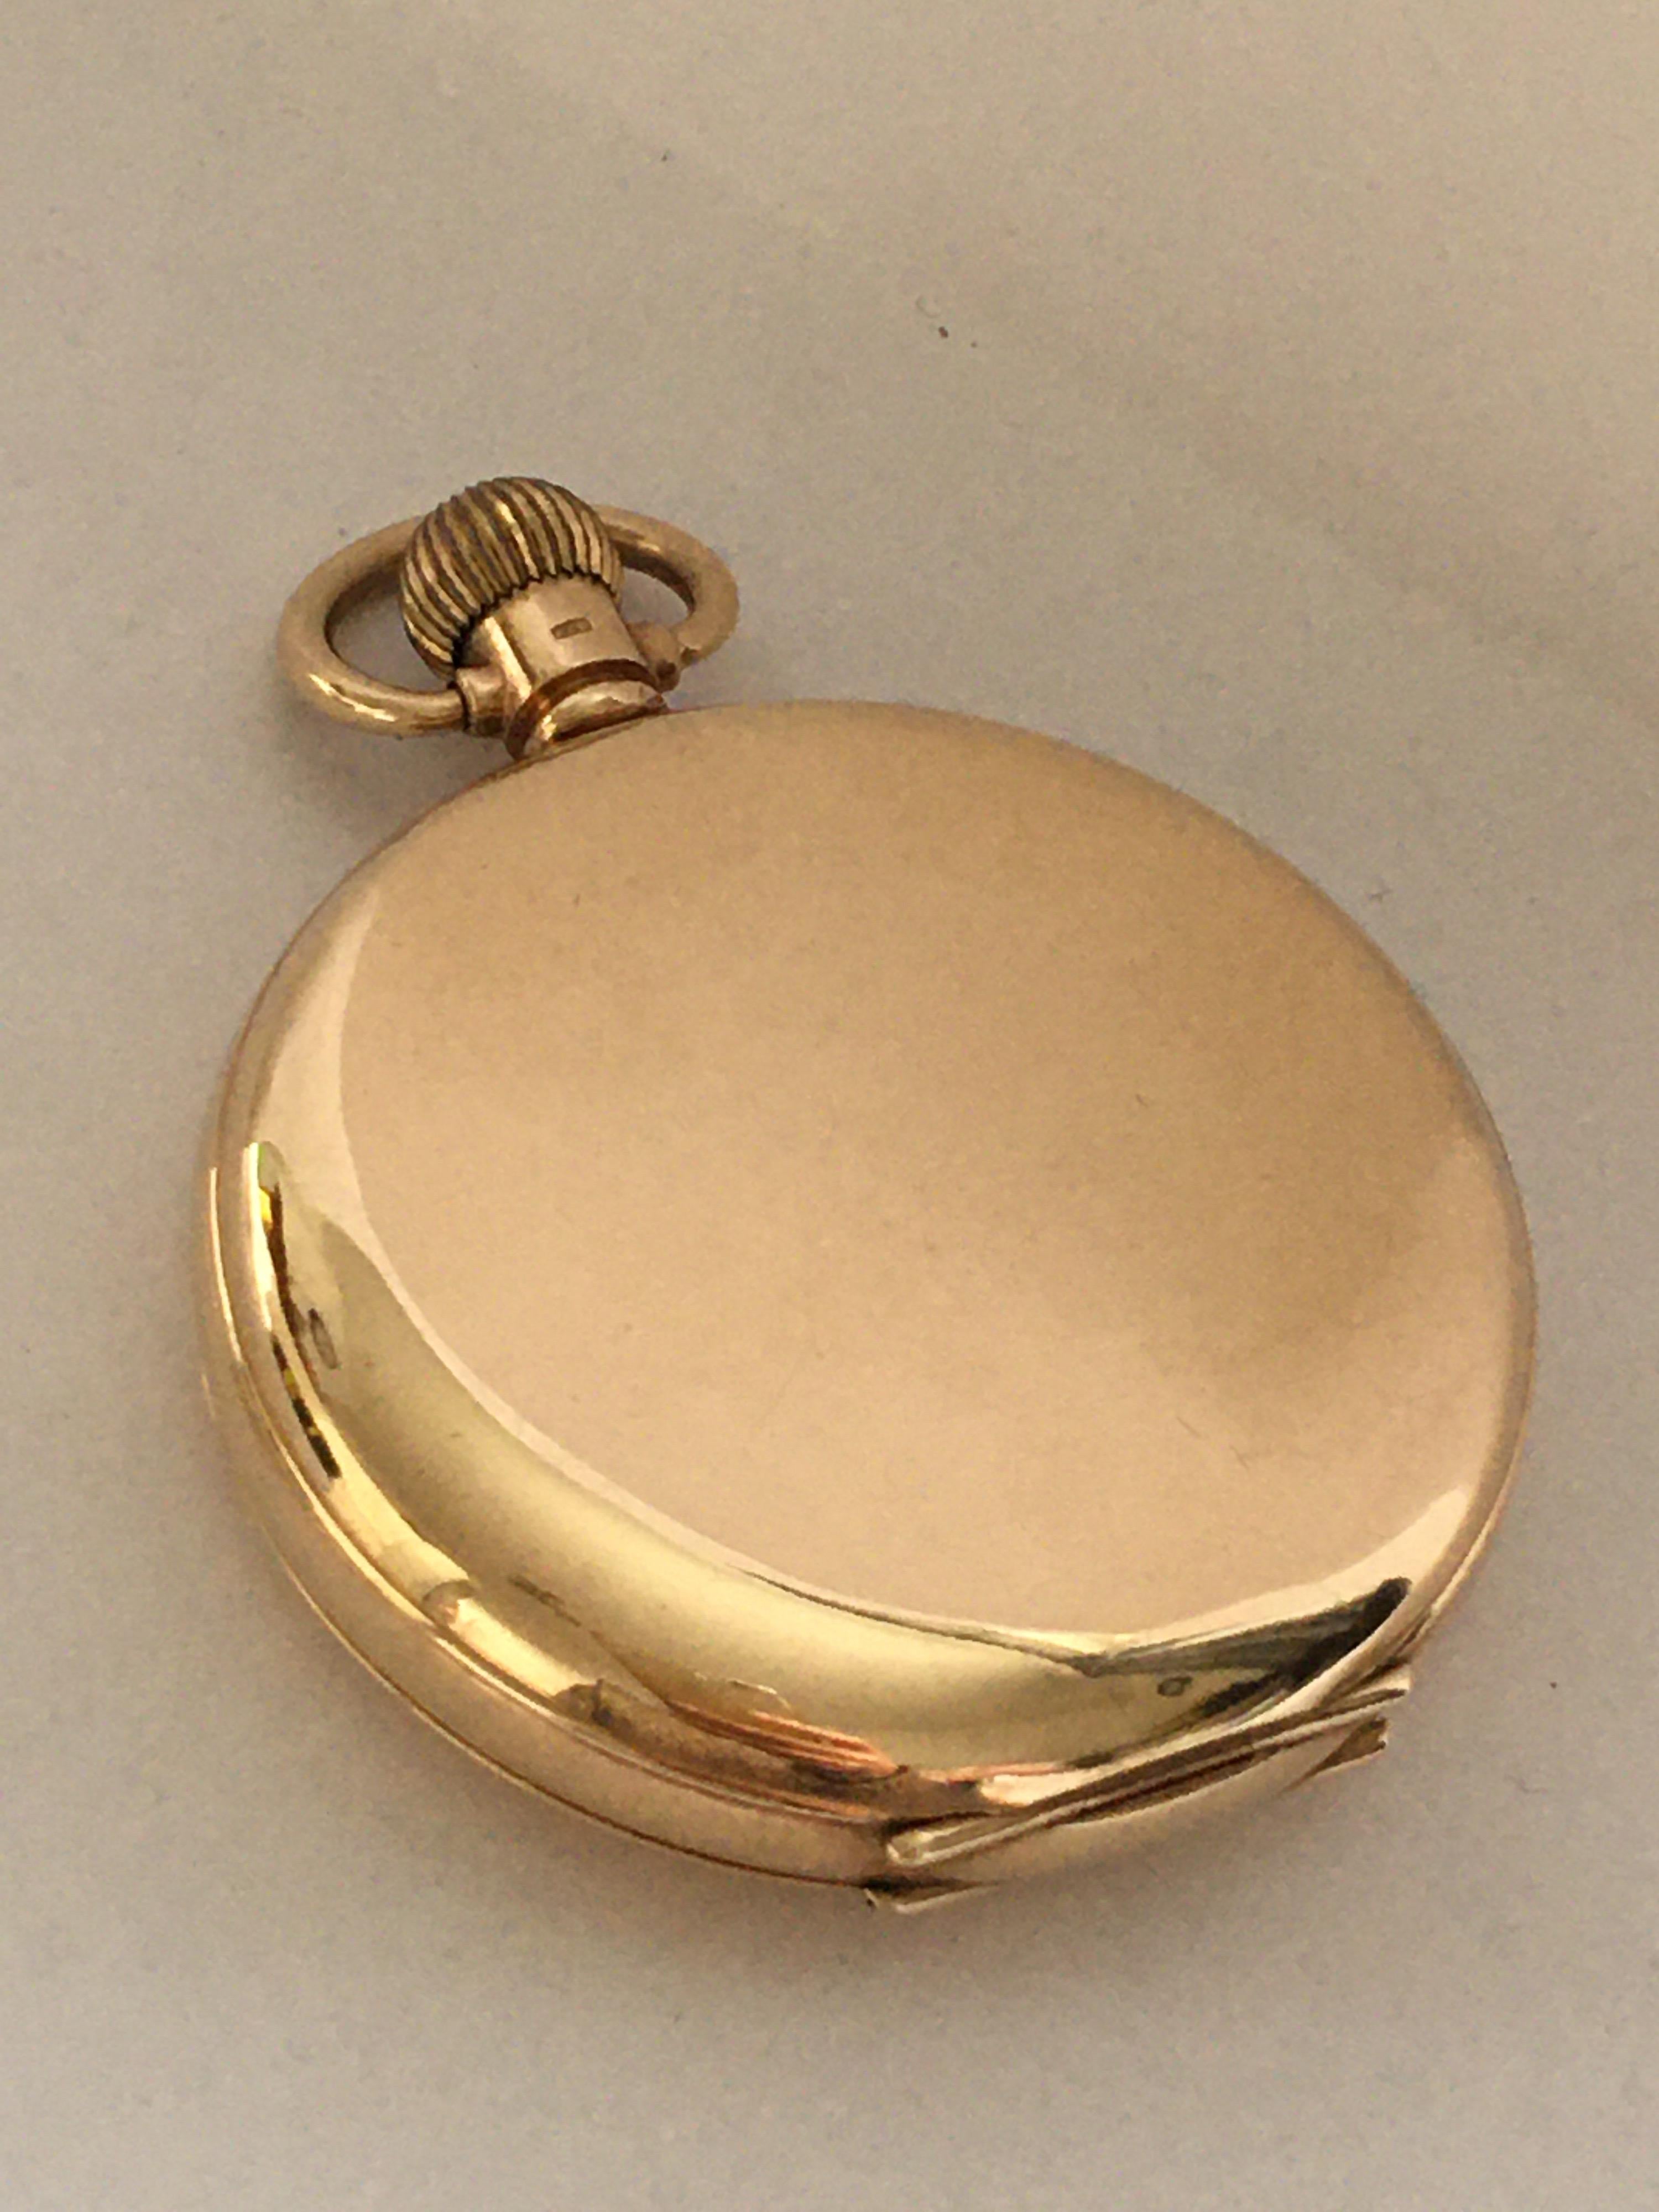 9k Gold Full Hunter Cased Pocket Watch Signed A.W.W. Co. Waltham Mass U.S.A.

This beautiful 50mm diameter watch is good working condition and it is running well. Visible signs of ageing and wear with tiny and light scratches on the gold case as